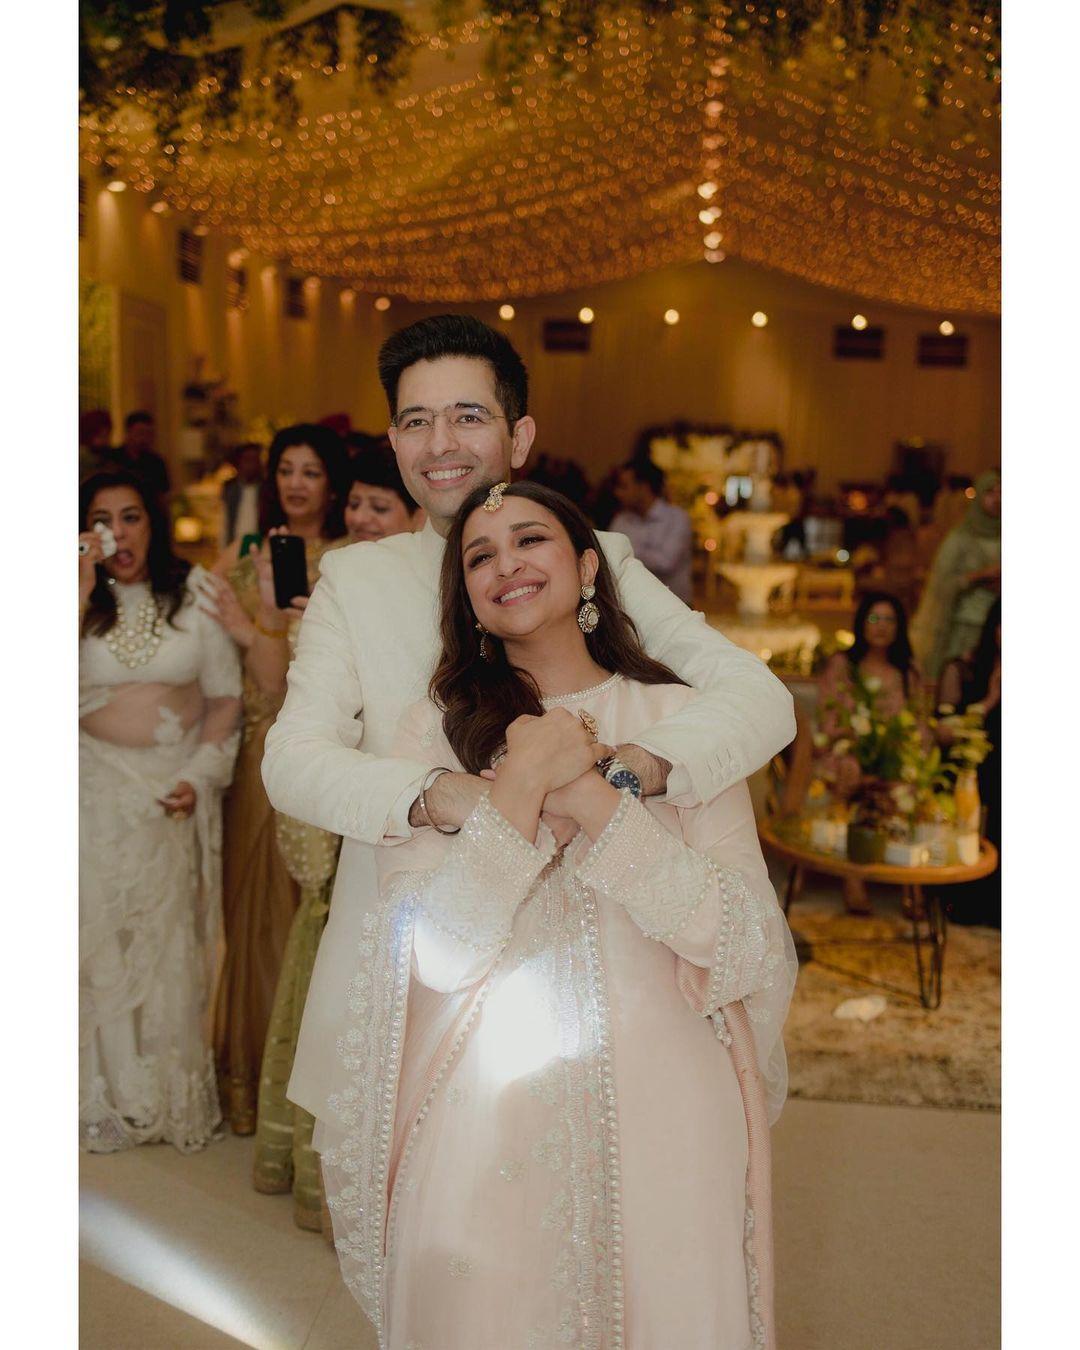 Raghav and Parineeti wore matching outfits for the ring exchange ceremony